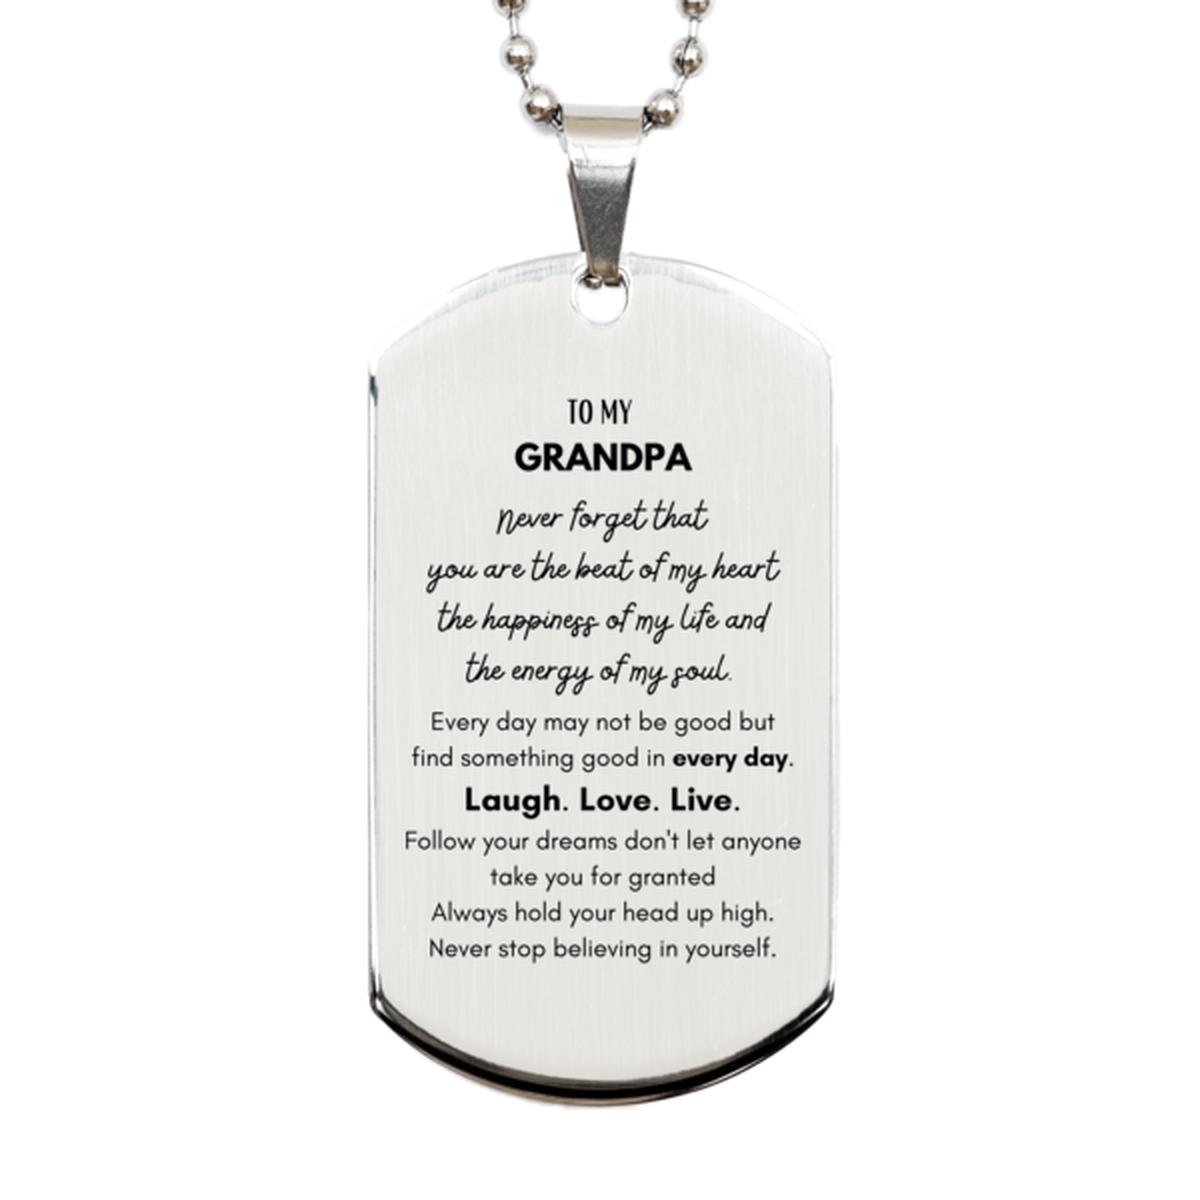 To My Grandpa Dogtag Gifts, Christmas Grandpa Silver Dog Tag Present, Birthday Unique Motivational For Grandpa, To My Grandpa Never forget that you are the beat of my heart the happiness of my life and the energy of my soul